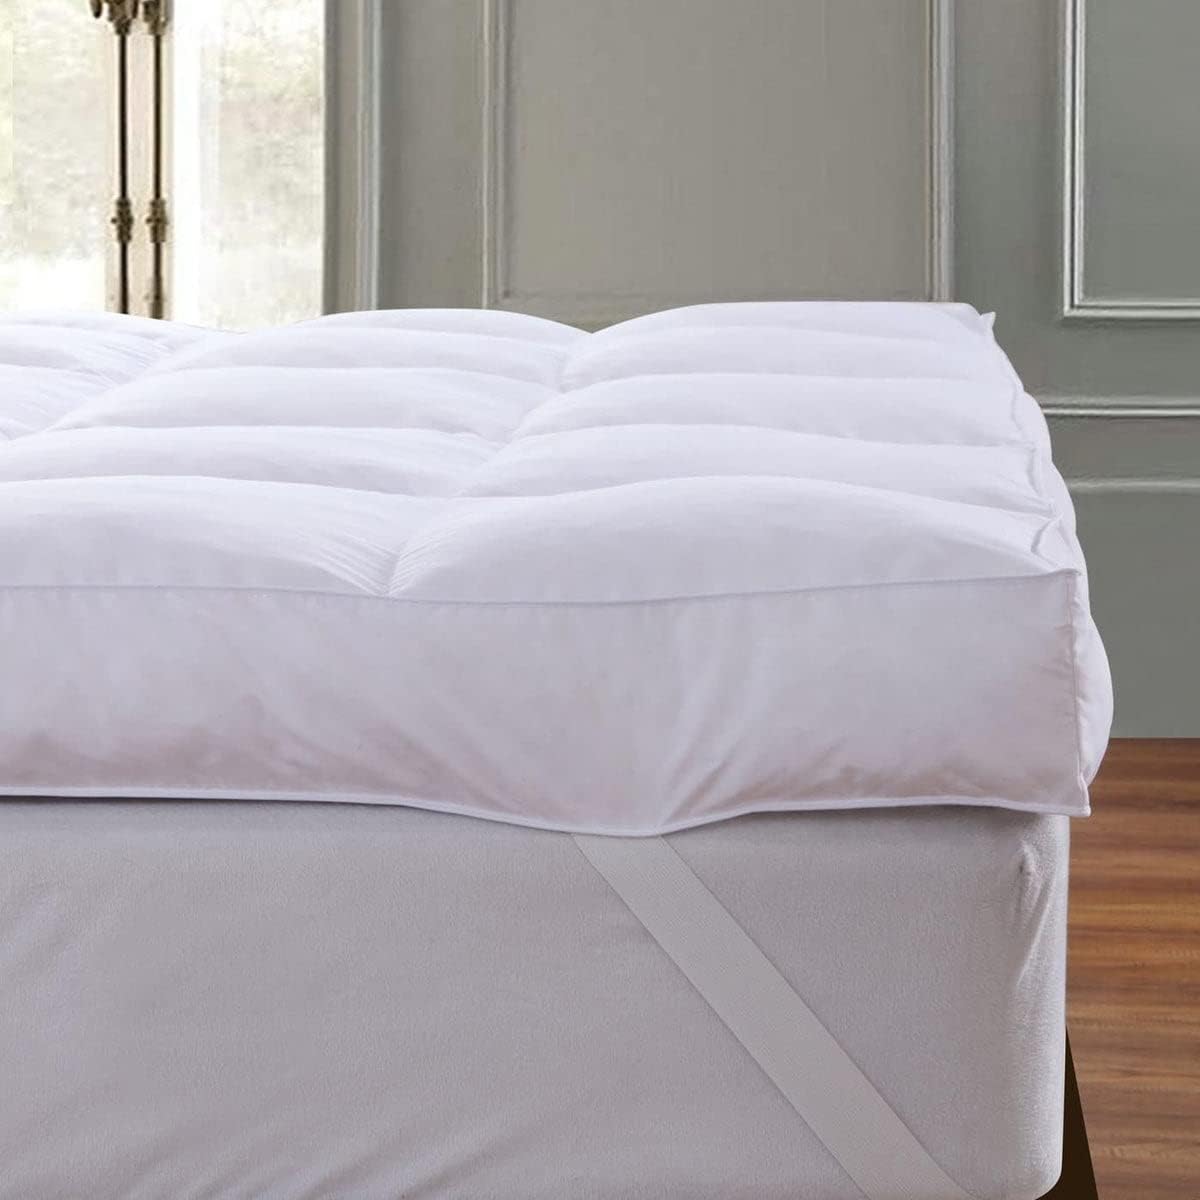 https://bigbigmart.com/wp-content/uploads/2023/09/QUEEN-ROSE-Mattress-Topper-Queen-Extra-Thick-Cooling-Mattress-Pad-Cover-Plush-Soft-Pillow-Top-Mattress-Topper-with-Overfilled-Snow-Down-Alternative-Soften-Firm-Bed-Back-Pain-Relief-White.jpg